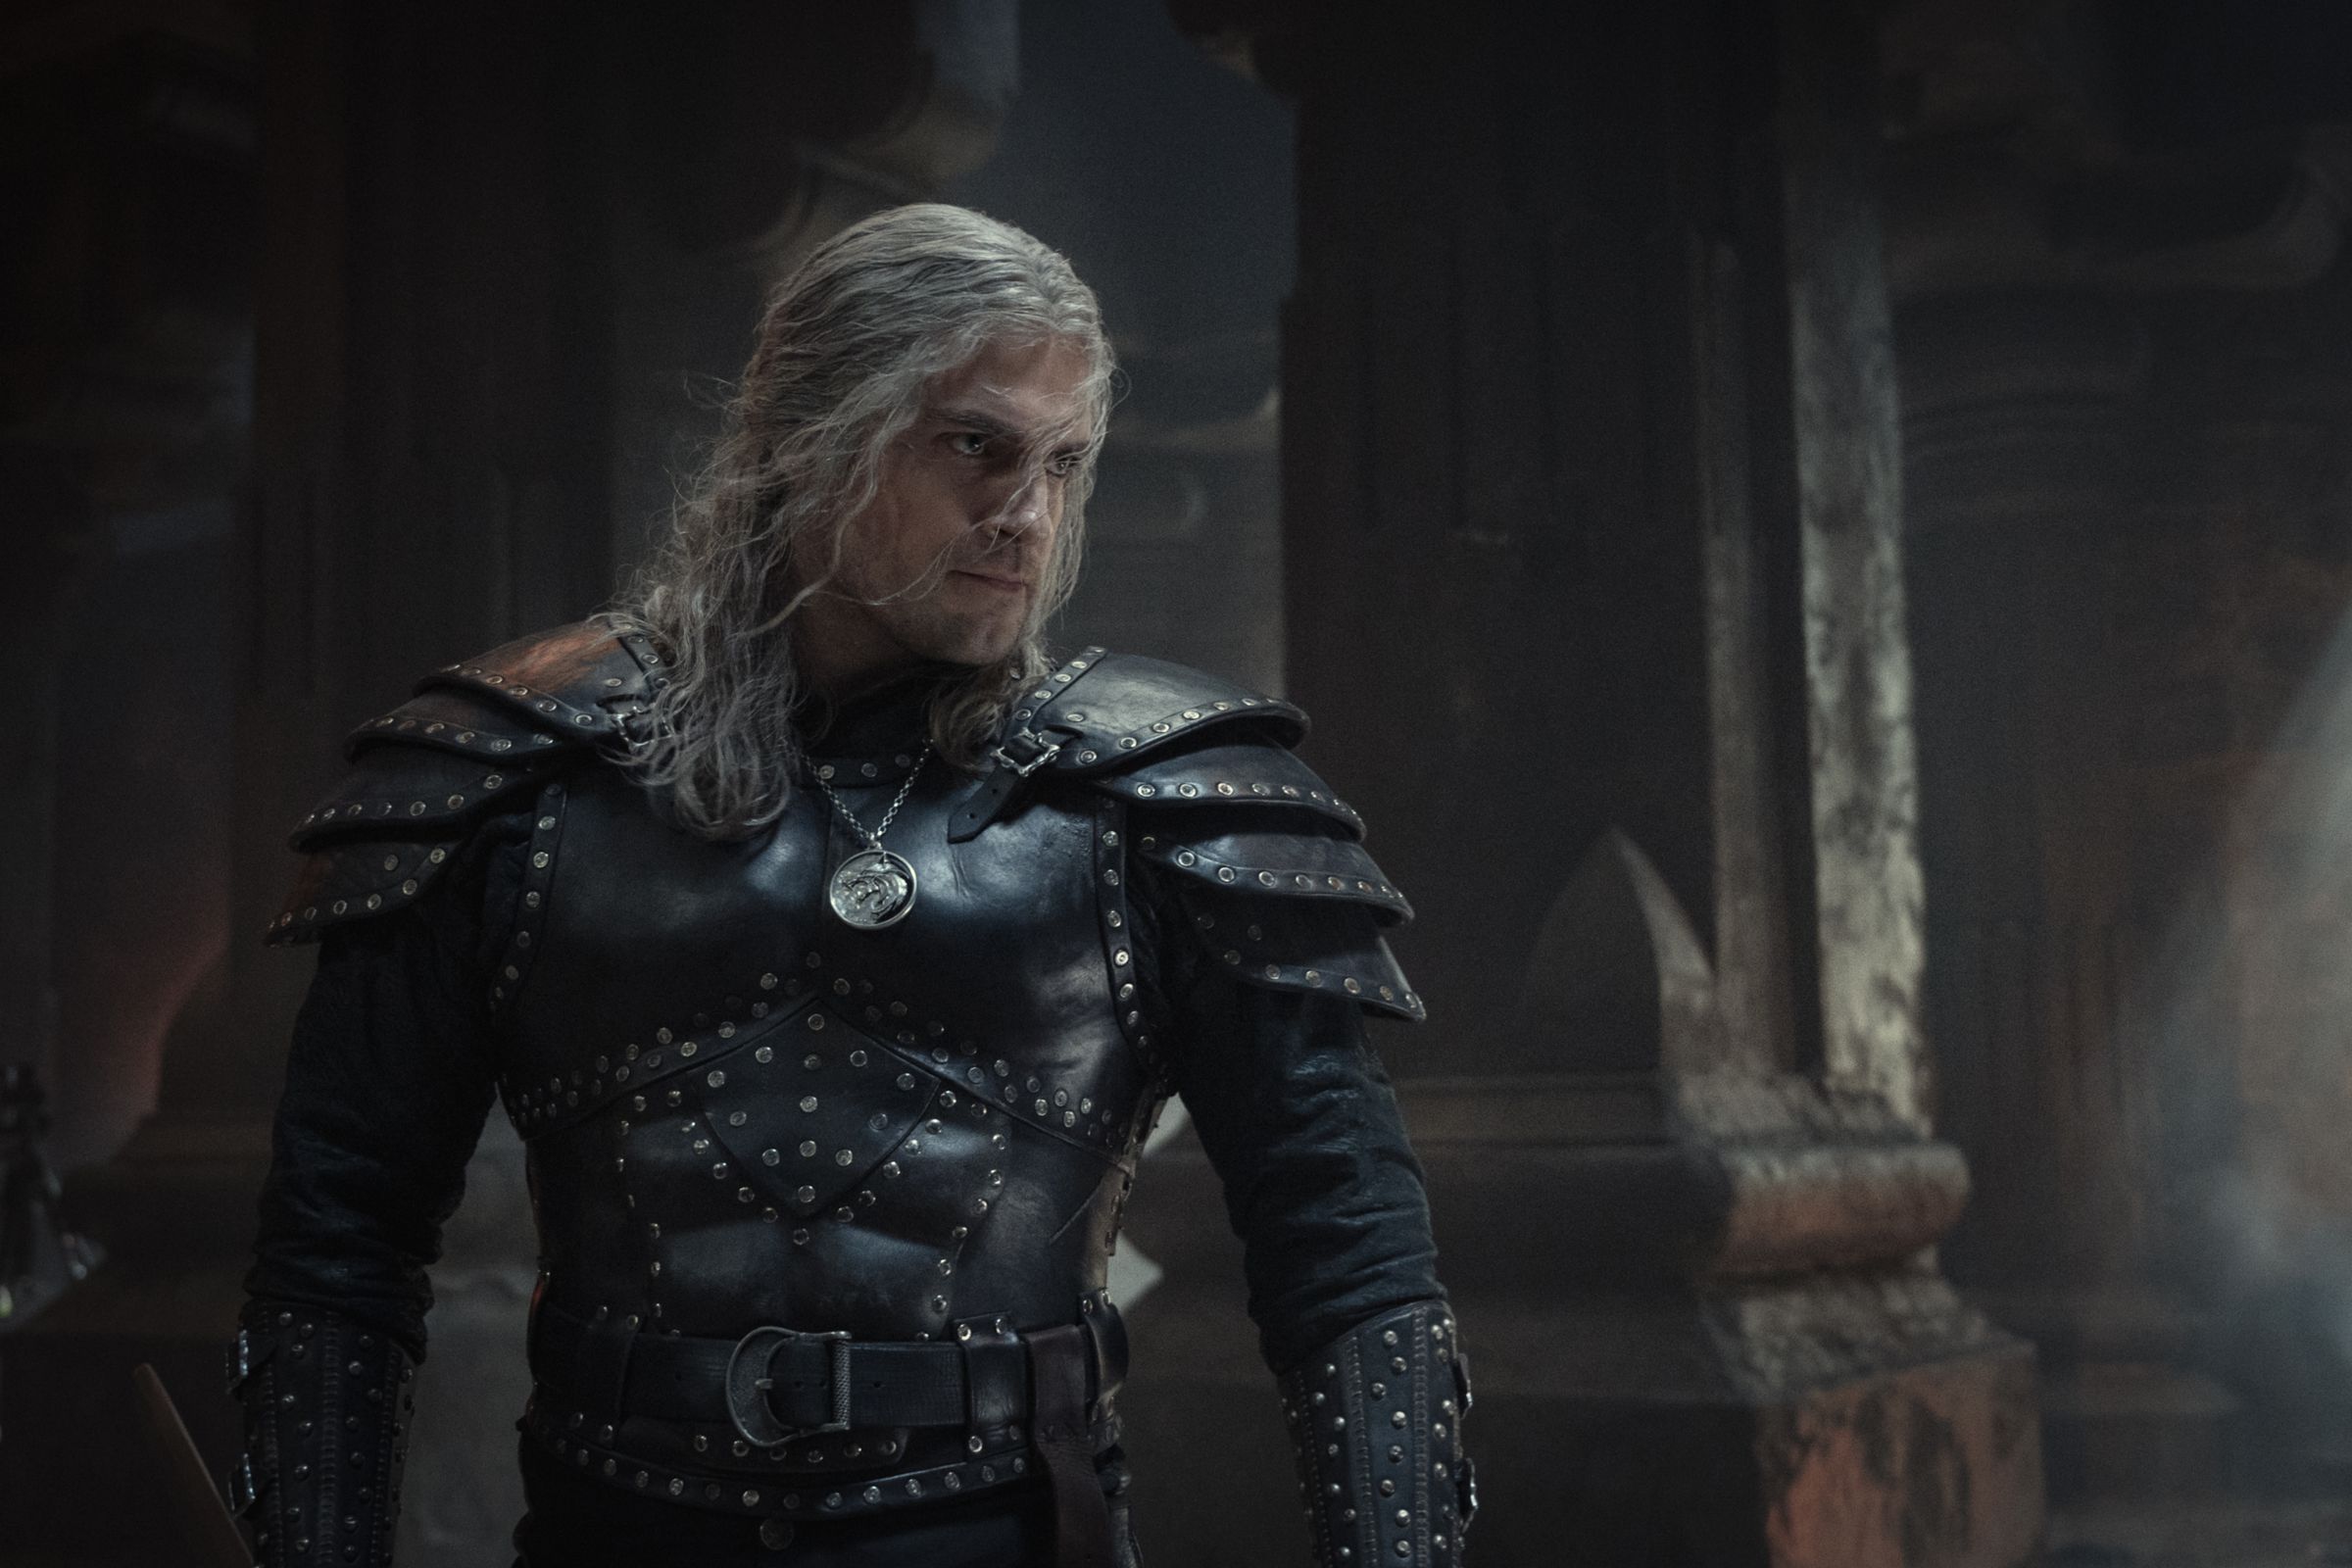 Henry Cavill in season 2 of The Witcher.